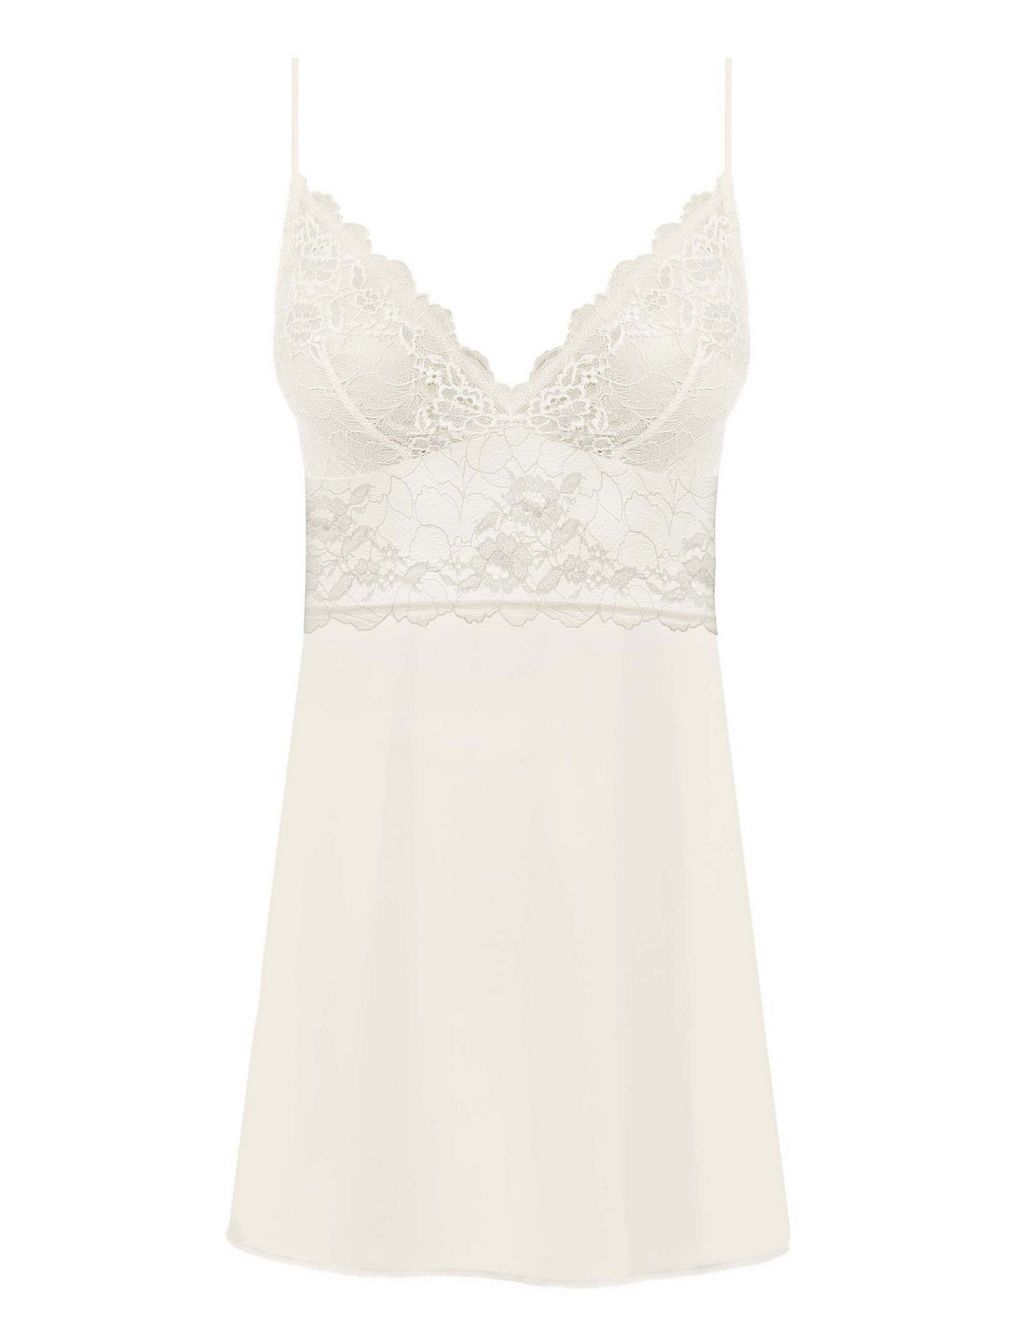 Lace Perfection Chemise 1 of 4